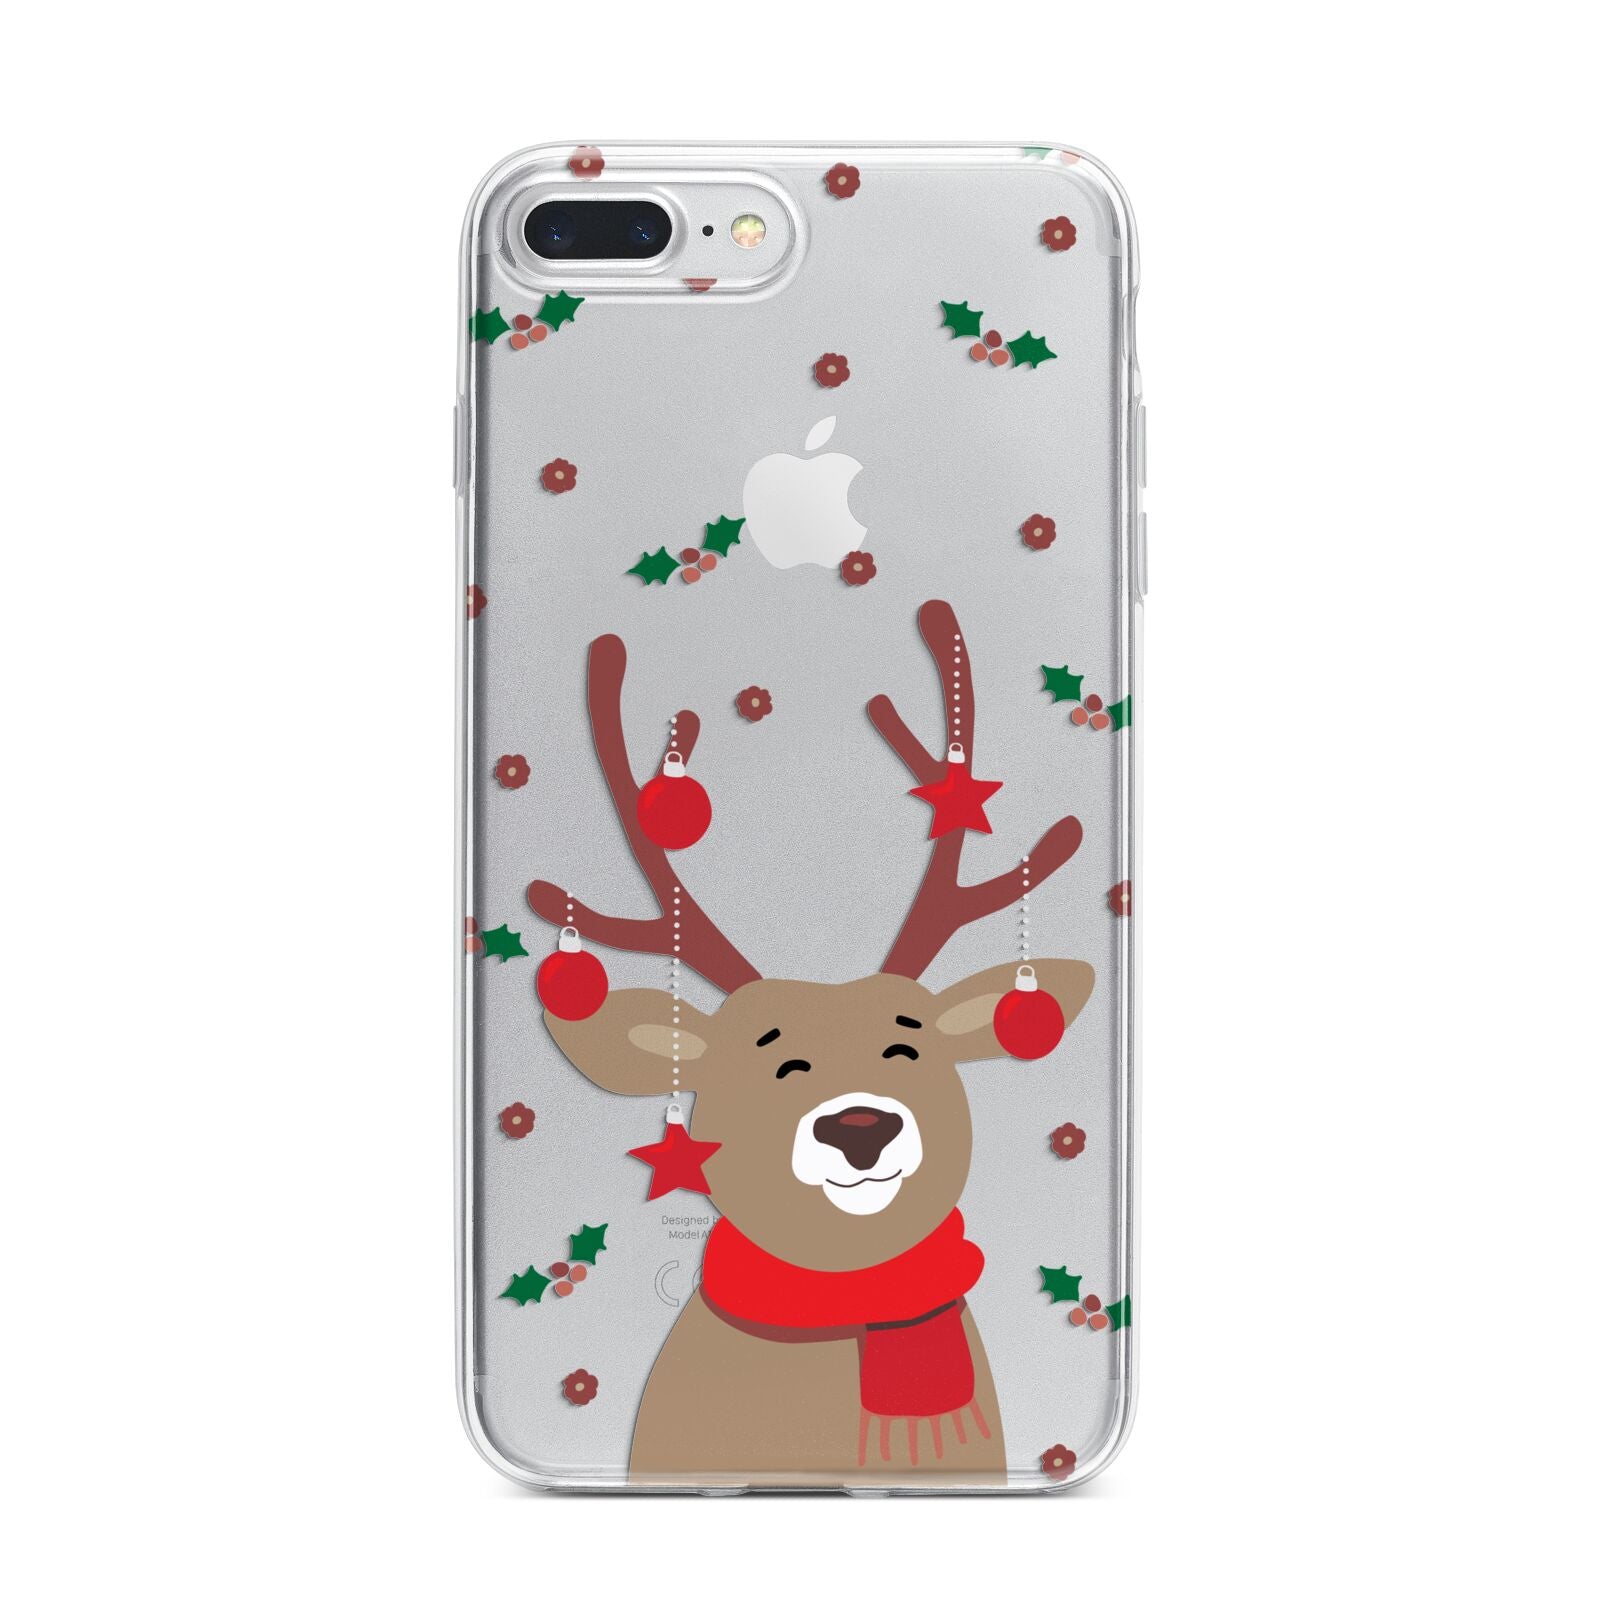 Reindeer Christmas iPhone 7 Plus Bumper Case on Silver iPhone